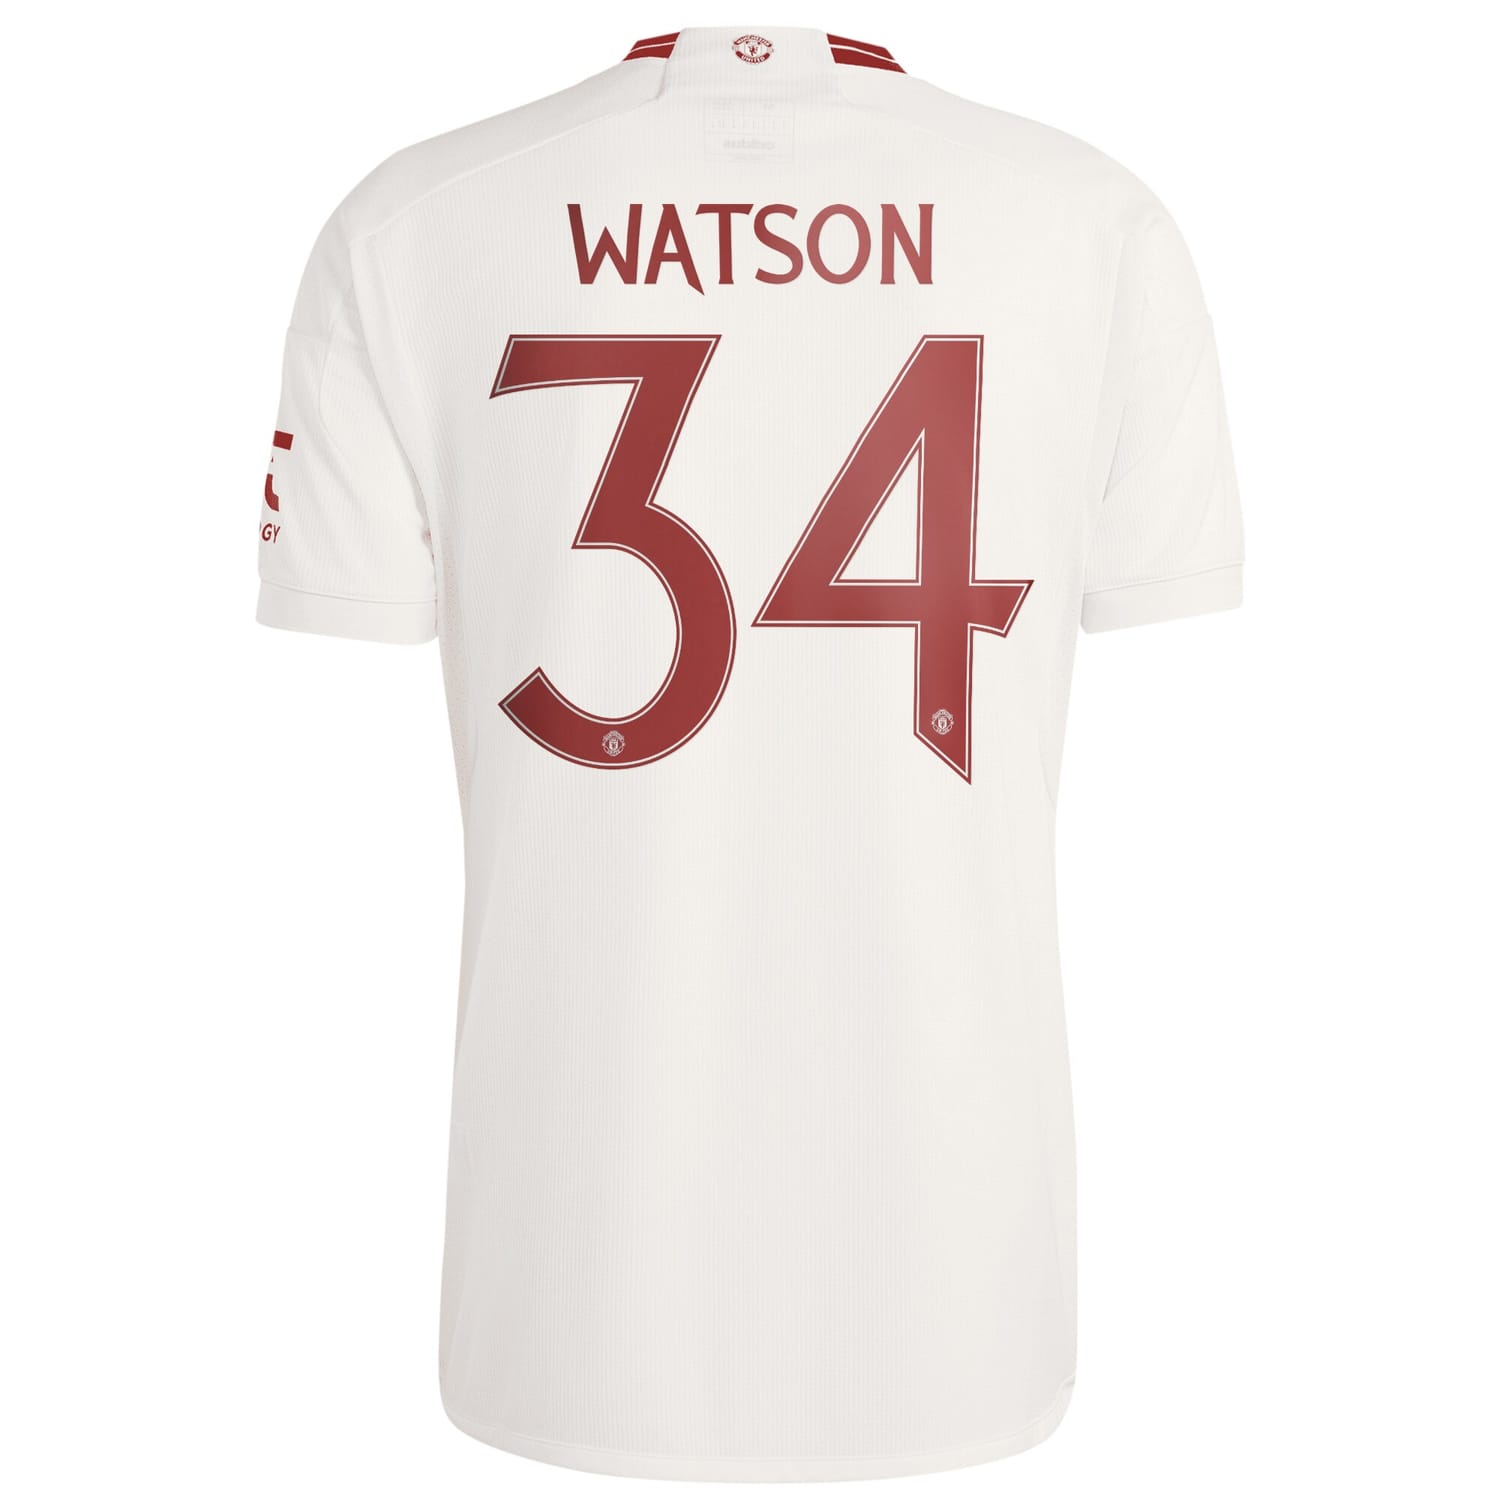 Premier League Manchester United Third Cup Jersey Shirt 2023-24 player Emma Watson printing for Men